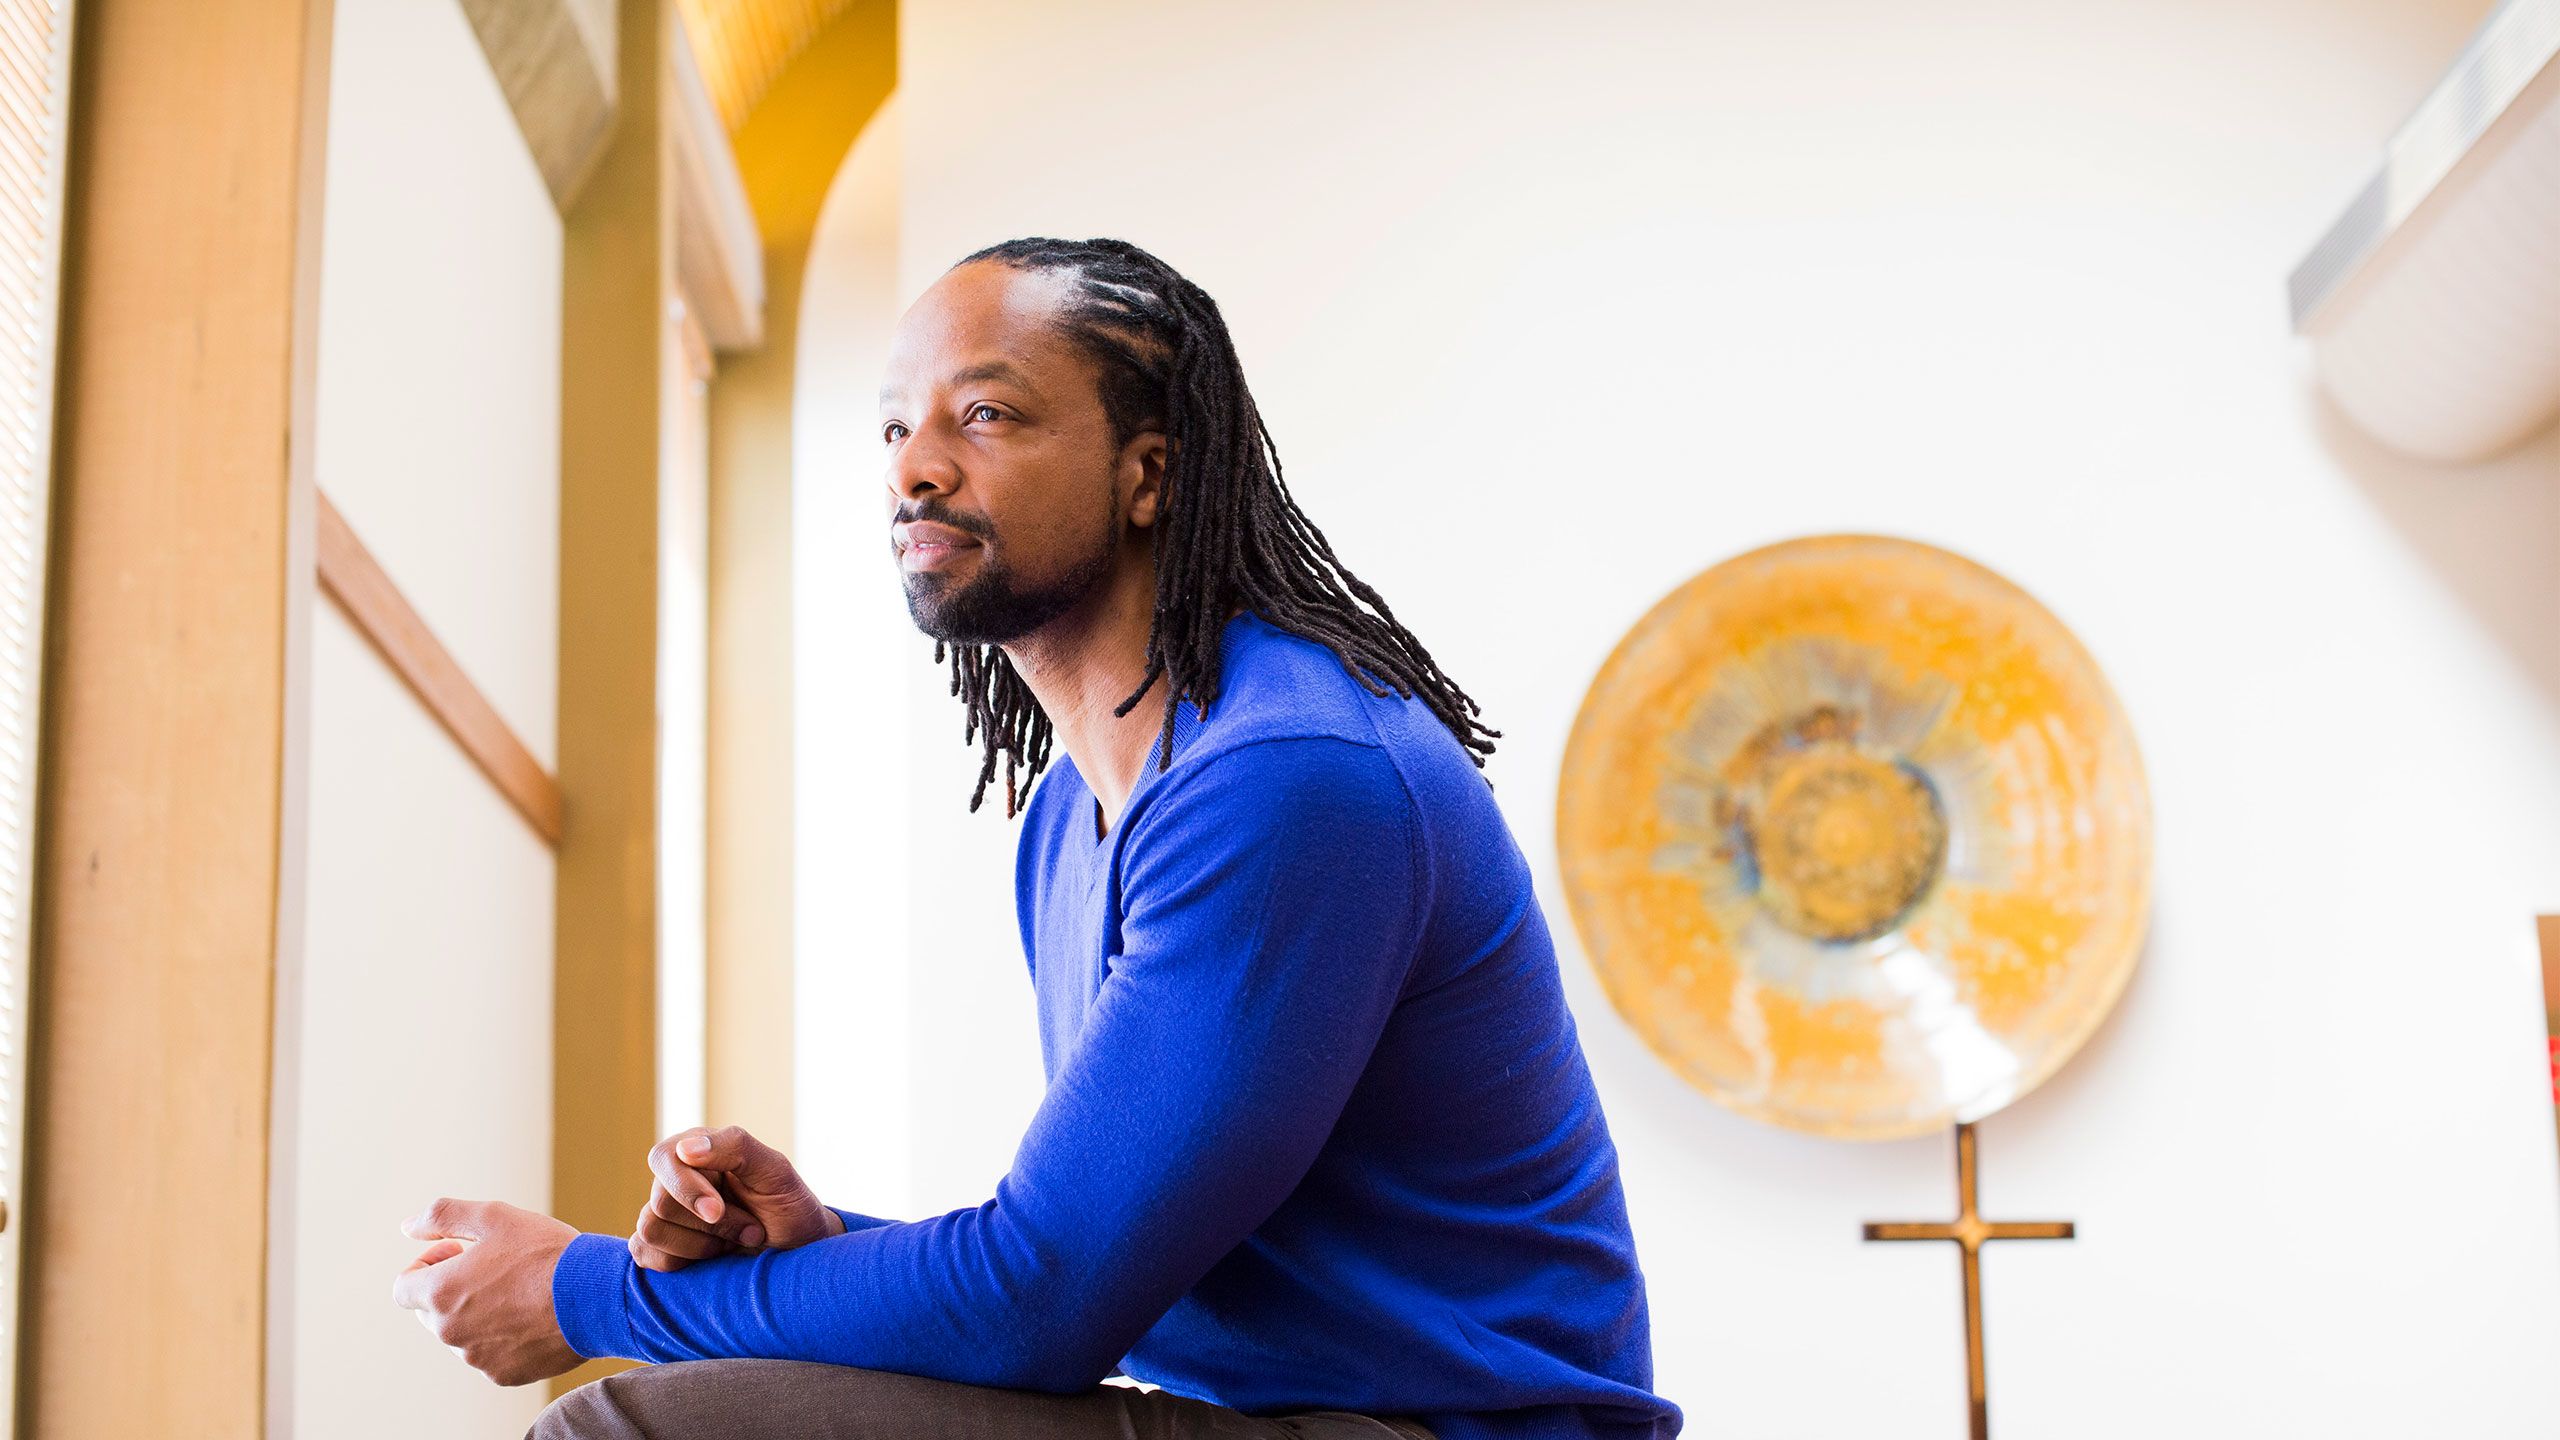 Poet and professor Jericho Brown appears in profile wearing a blue sweater